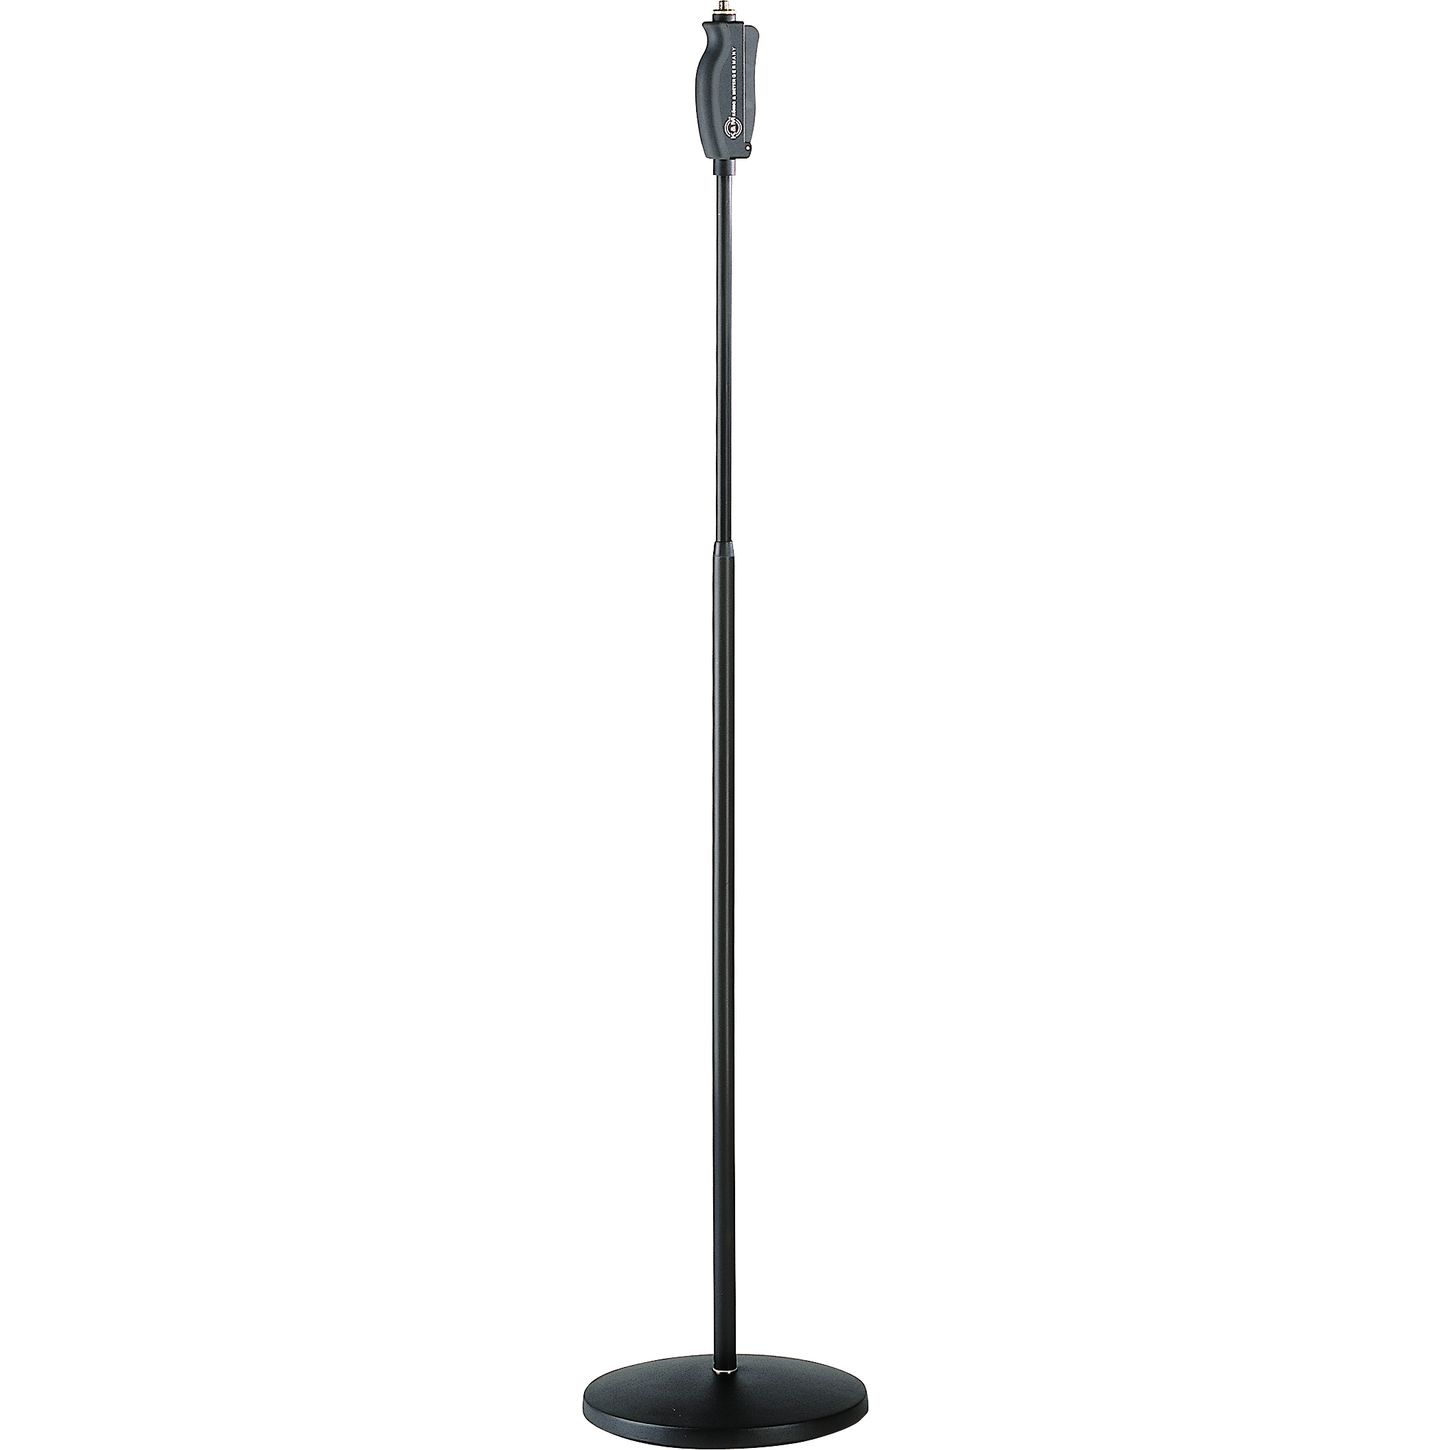 Mic stand silhouette clipart of black